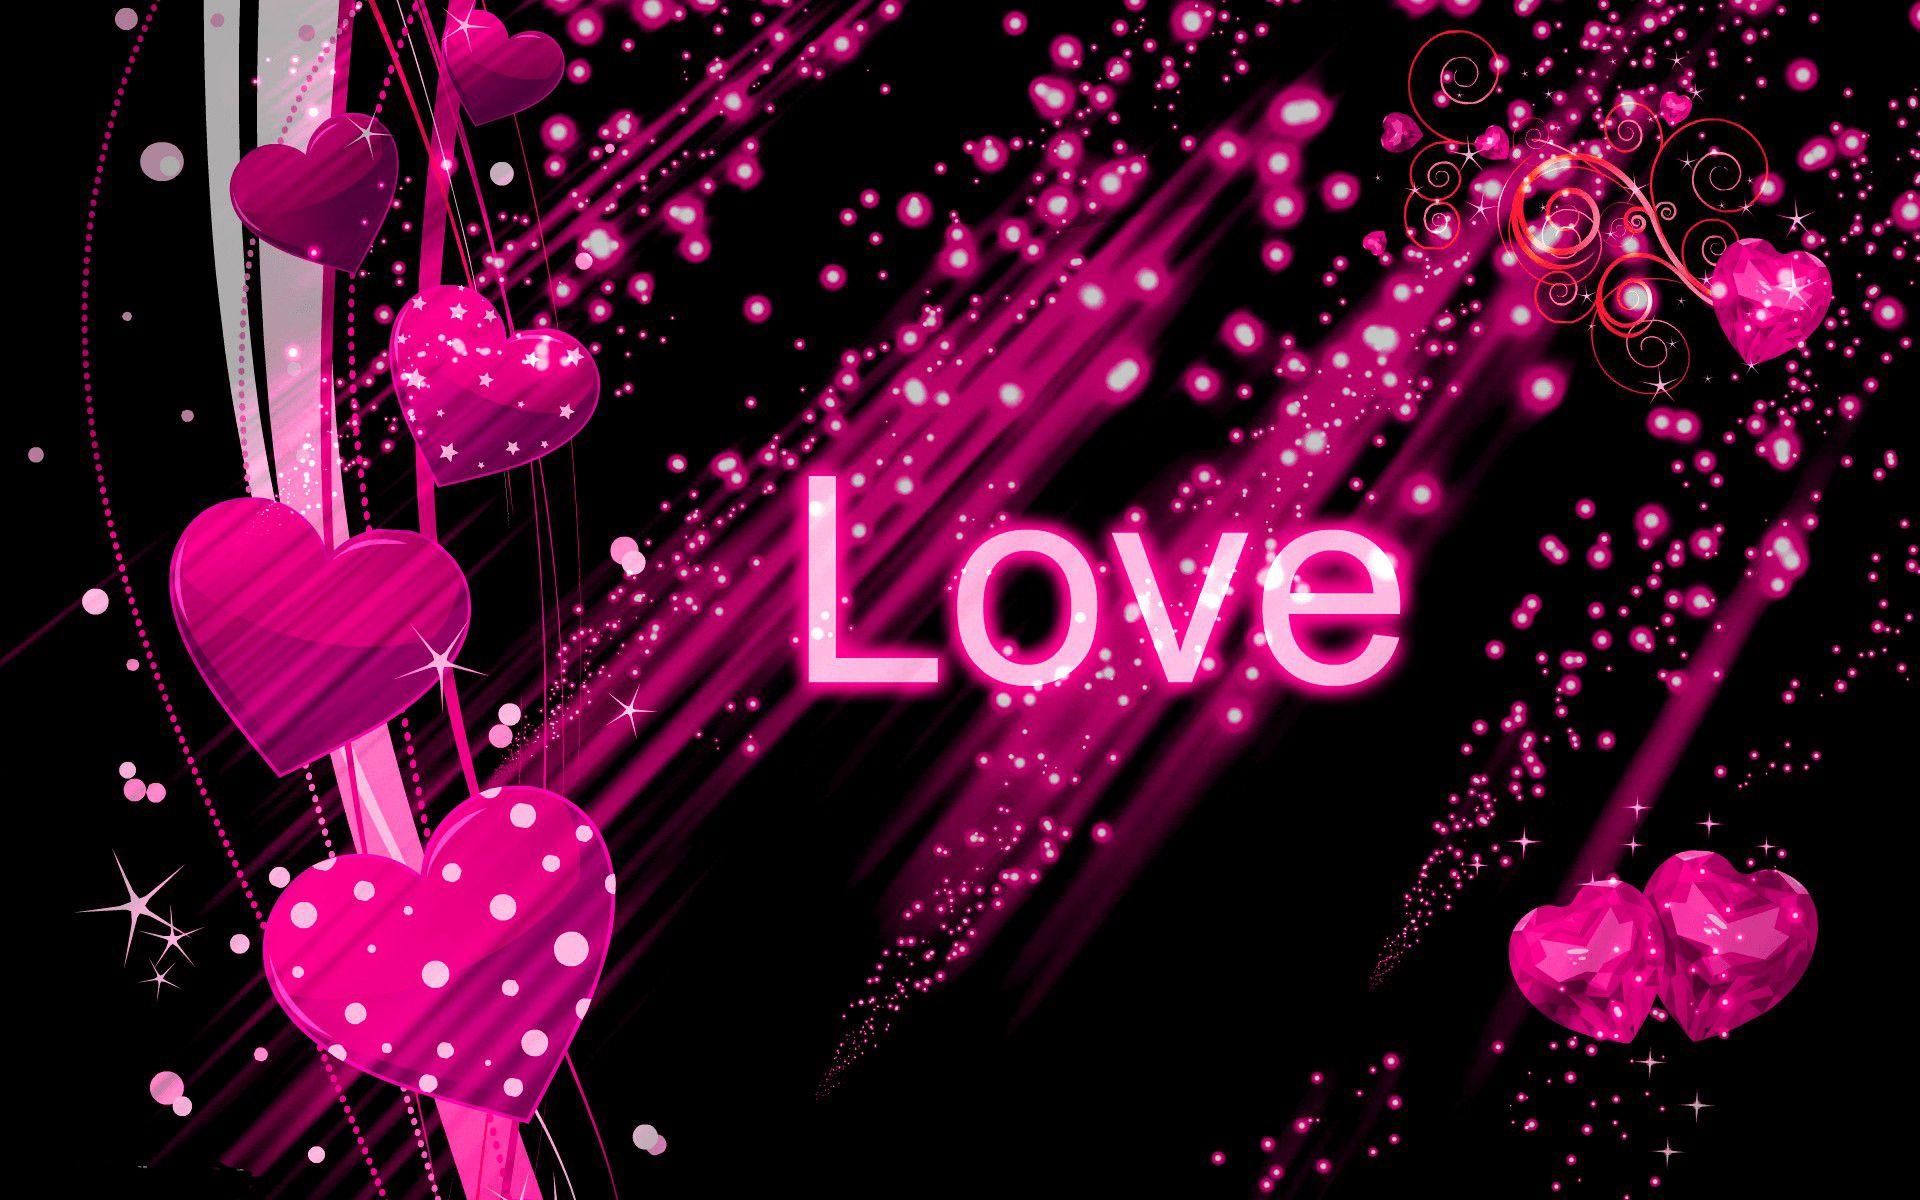 Black And Pink Heart Wallpaper - Focus Wiring